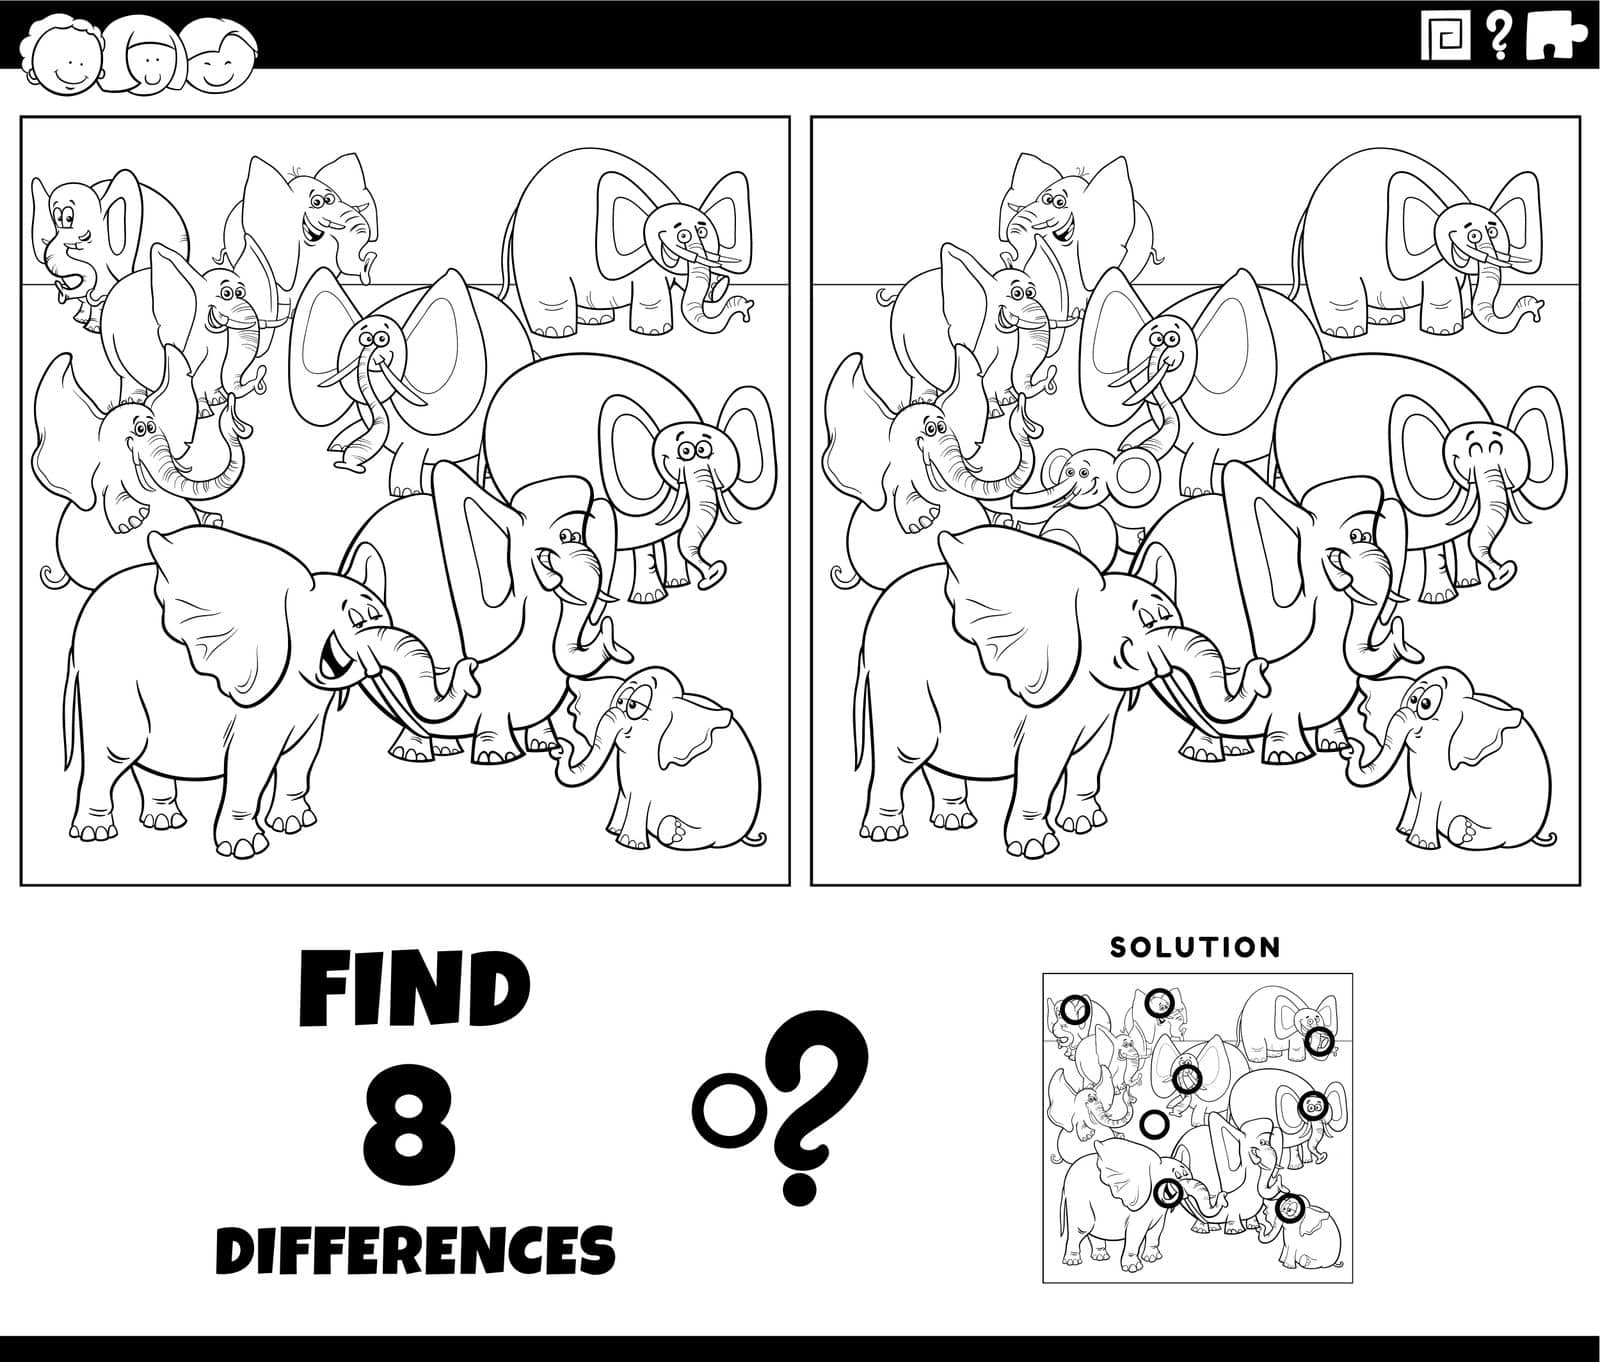 Black and white cartoon illustration of finding the differences between pictures educational game with elephants animal characters coloring page